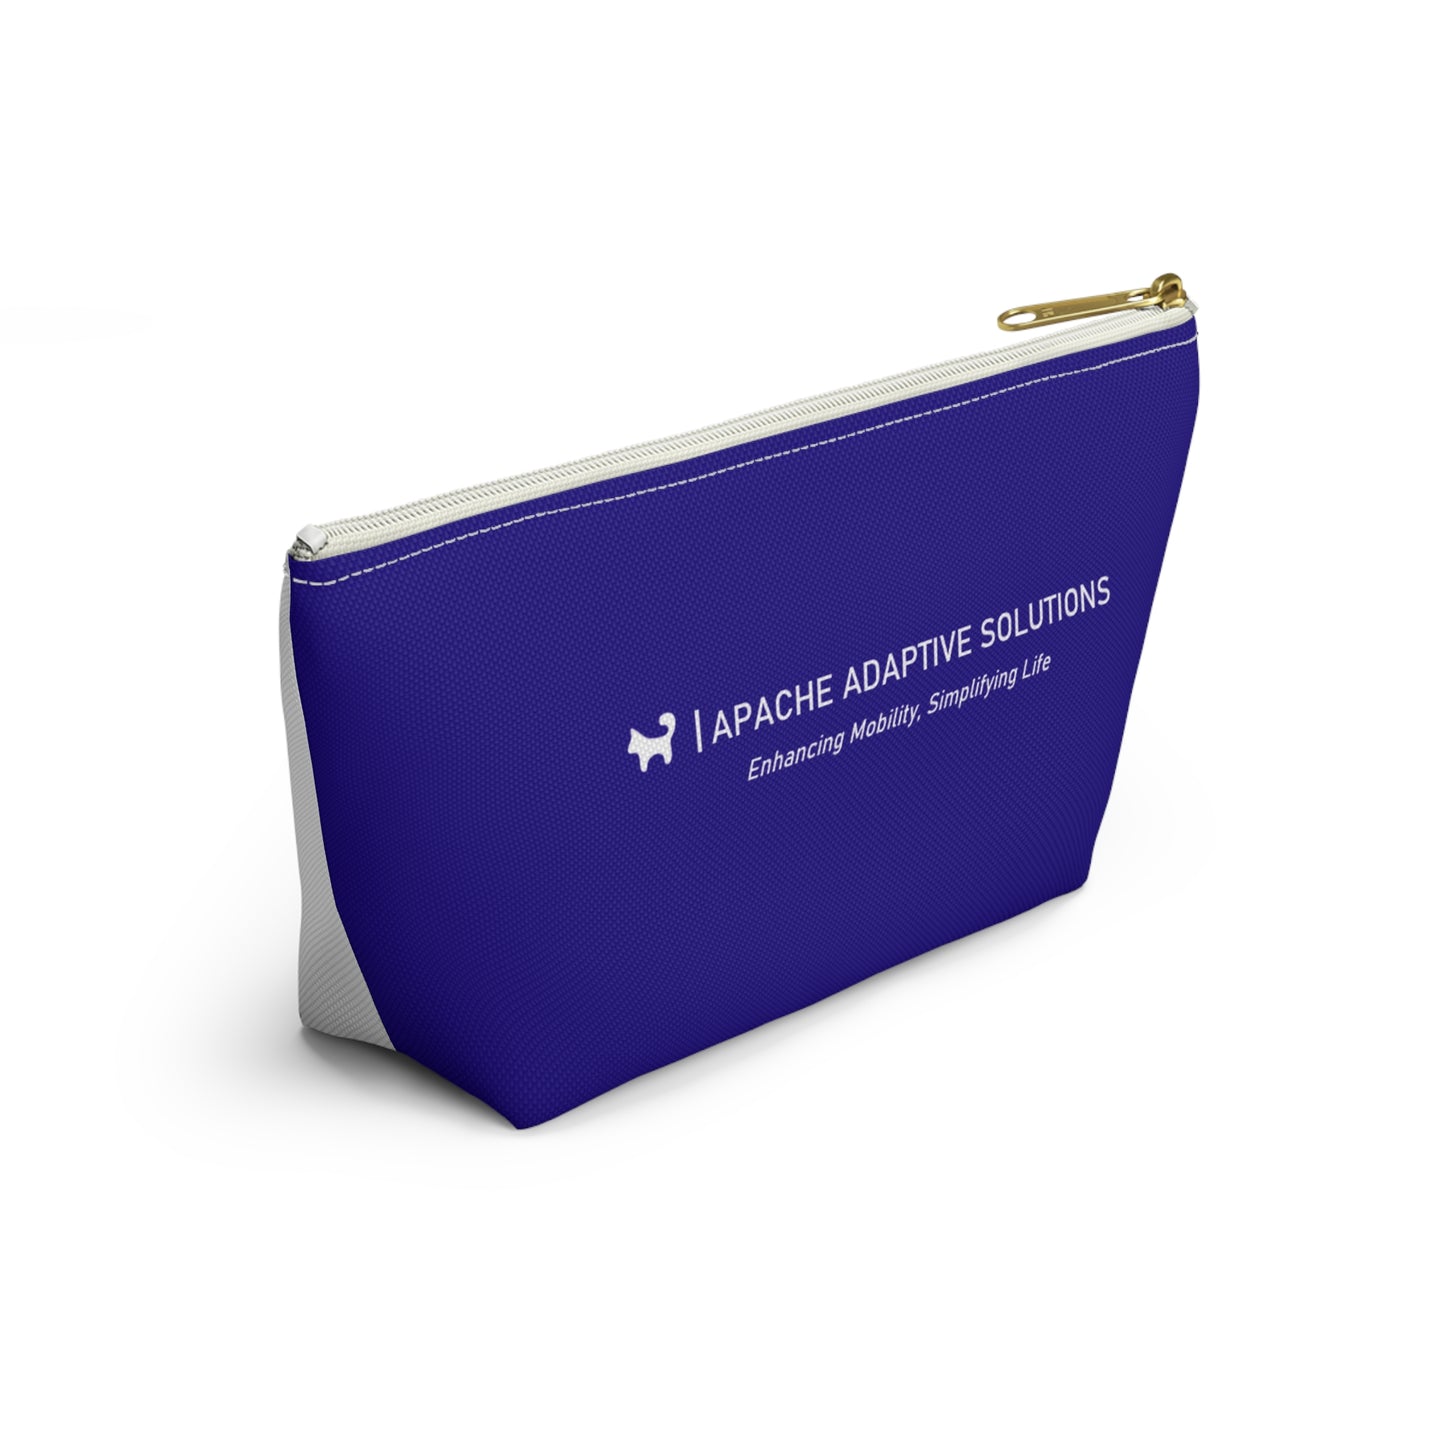 Accessory Pouch back with slogan "apache adaptive solutions, enhancing mobility, simplifying life." diagnal view